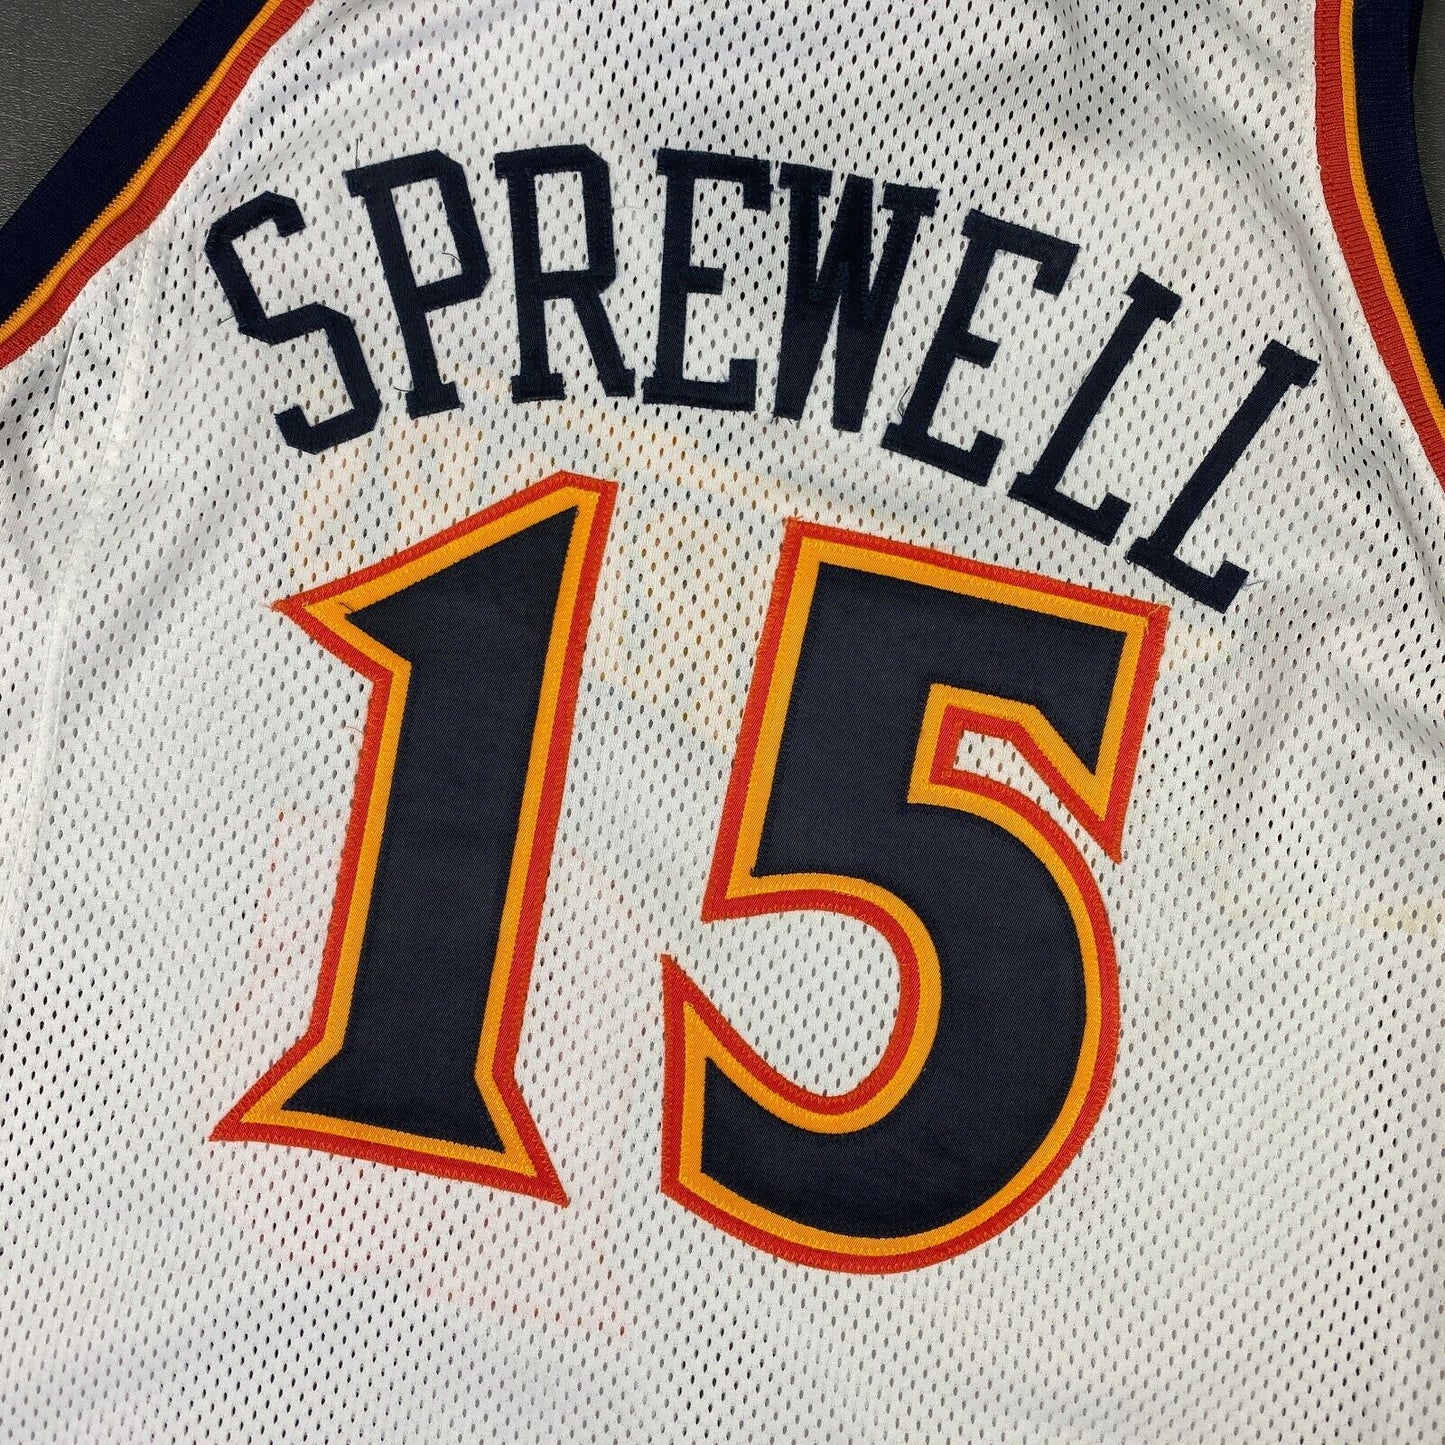 100% Authentic Latrell Sprewell 1997 1998 Warriors Pro Cut Game Jersey 48+4"